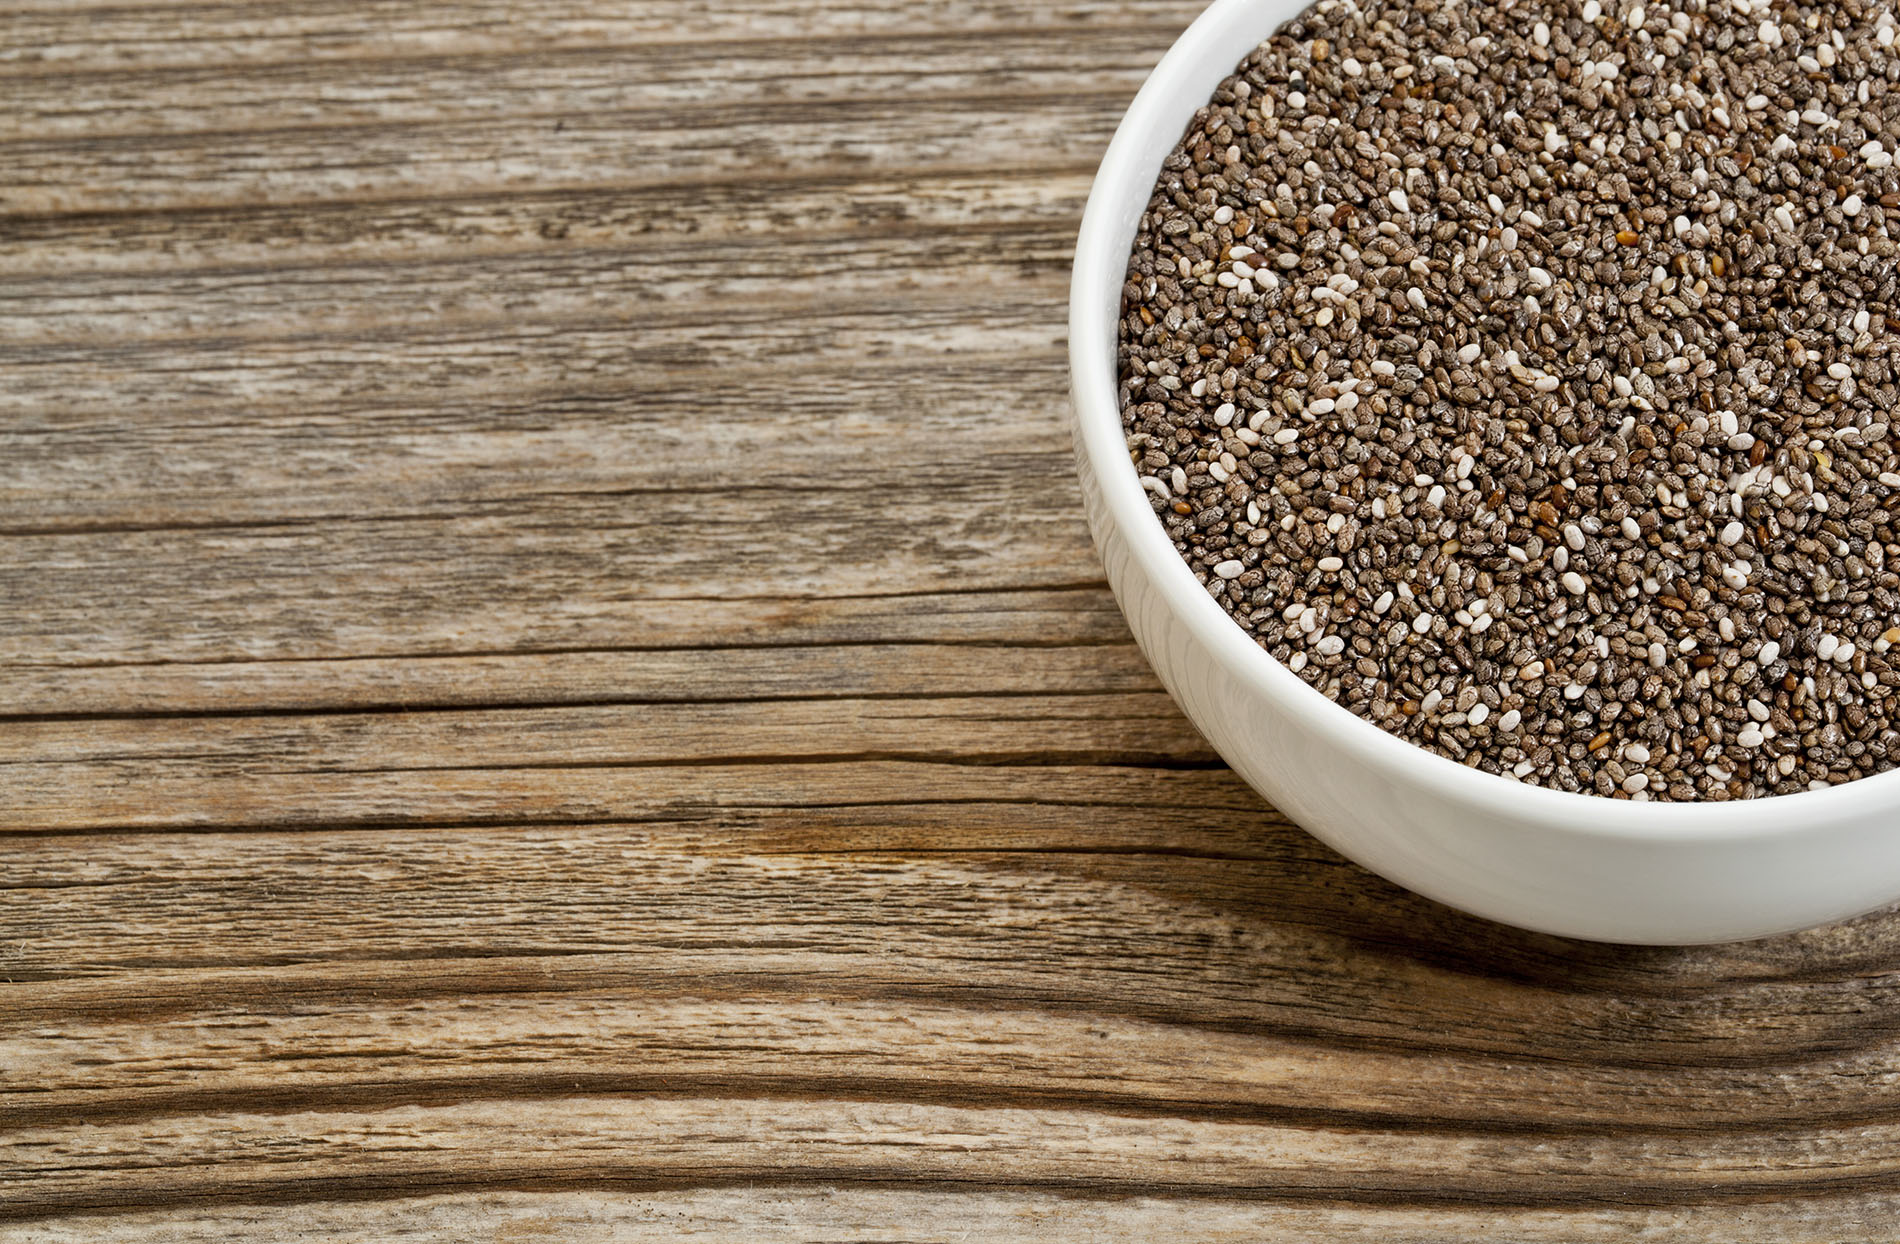 lose weight and improve health with chia